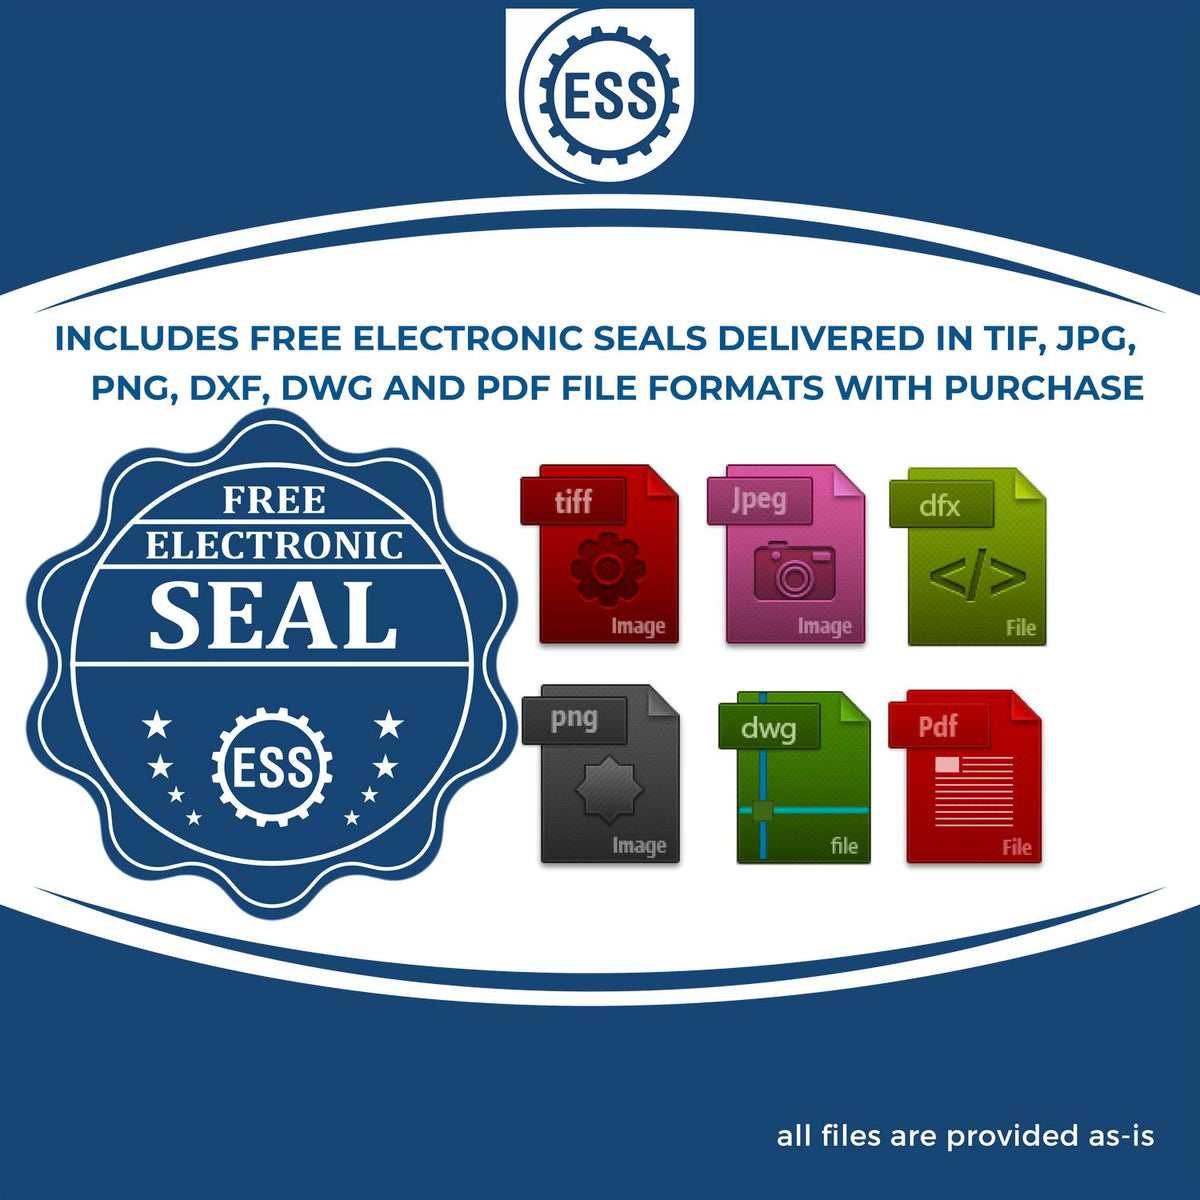 An infographic for the free electronic seal for the Self-Inking State Seal Nebraska Notary Stamp illustrating the different file type icons such as DXF, DWG, TIF, JPG and PNG.